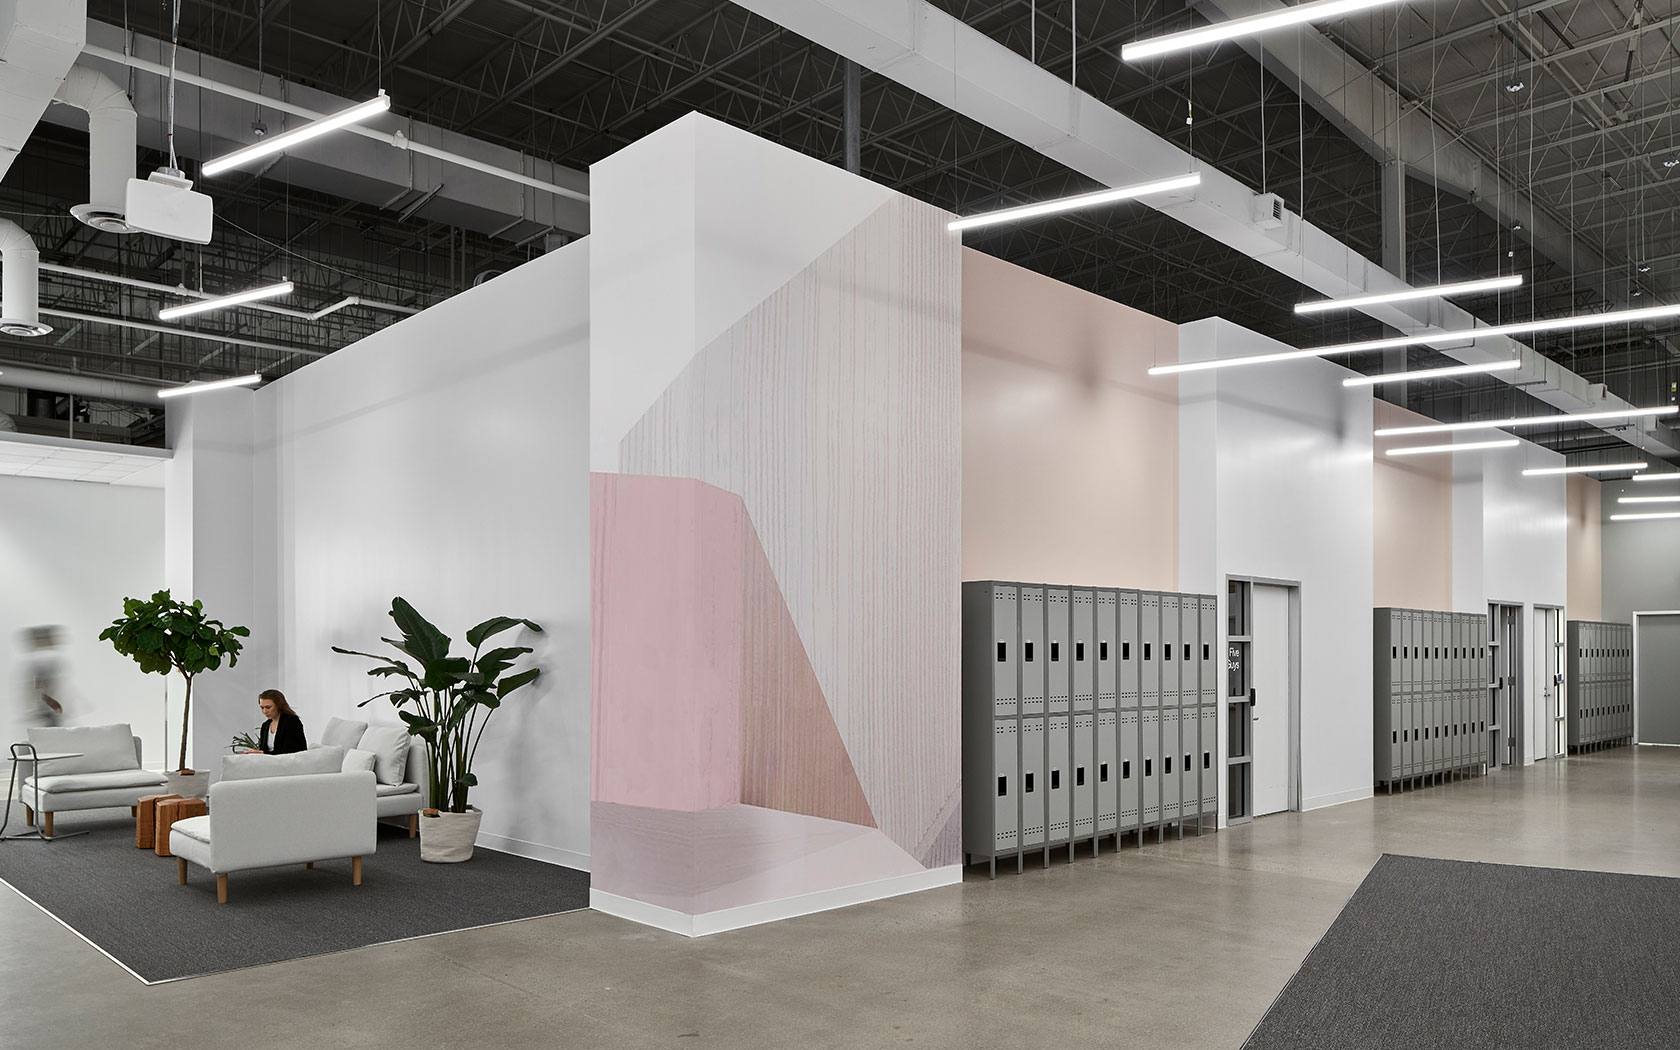 Soaring ceilings, industrial details, can crisp white furnishings create ambiance for Postmates Nashville headquarters.